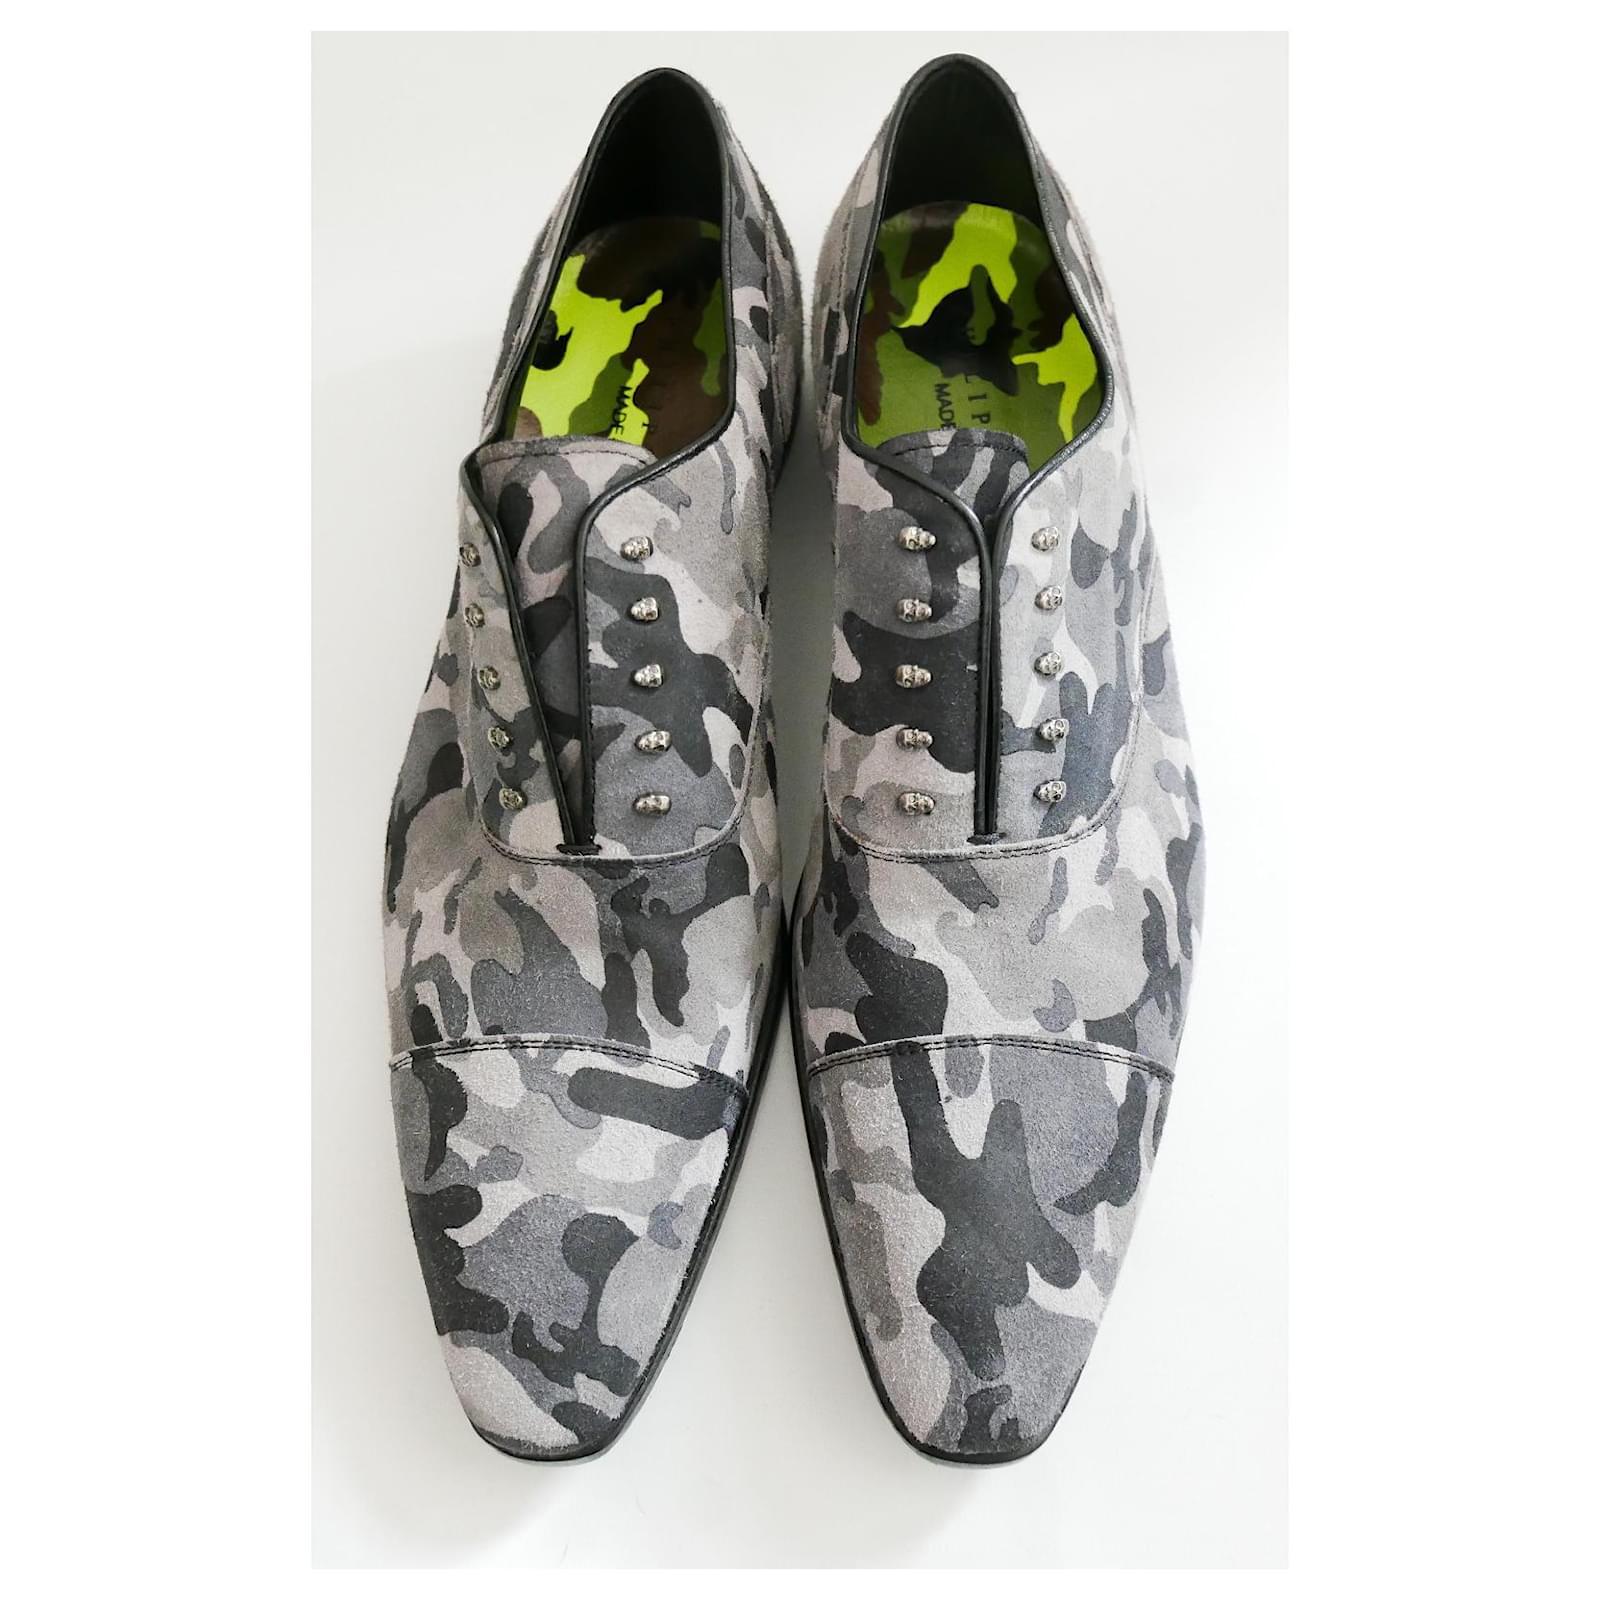 Super cool Camouflage Skull Class Shoes from Philipp Plein's SS14 Collection. bought for £700 and unworn with sticker tags, box and printed tissue. Made from grey camo printed brushed suede with black leather edges, tiny skulls to front, small